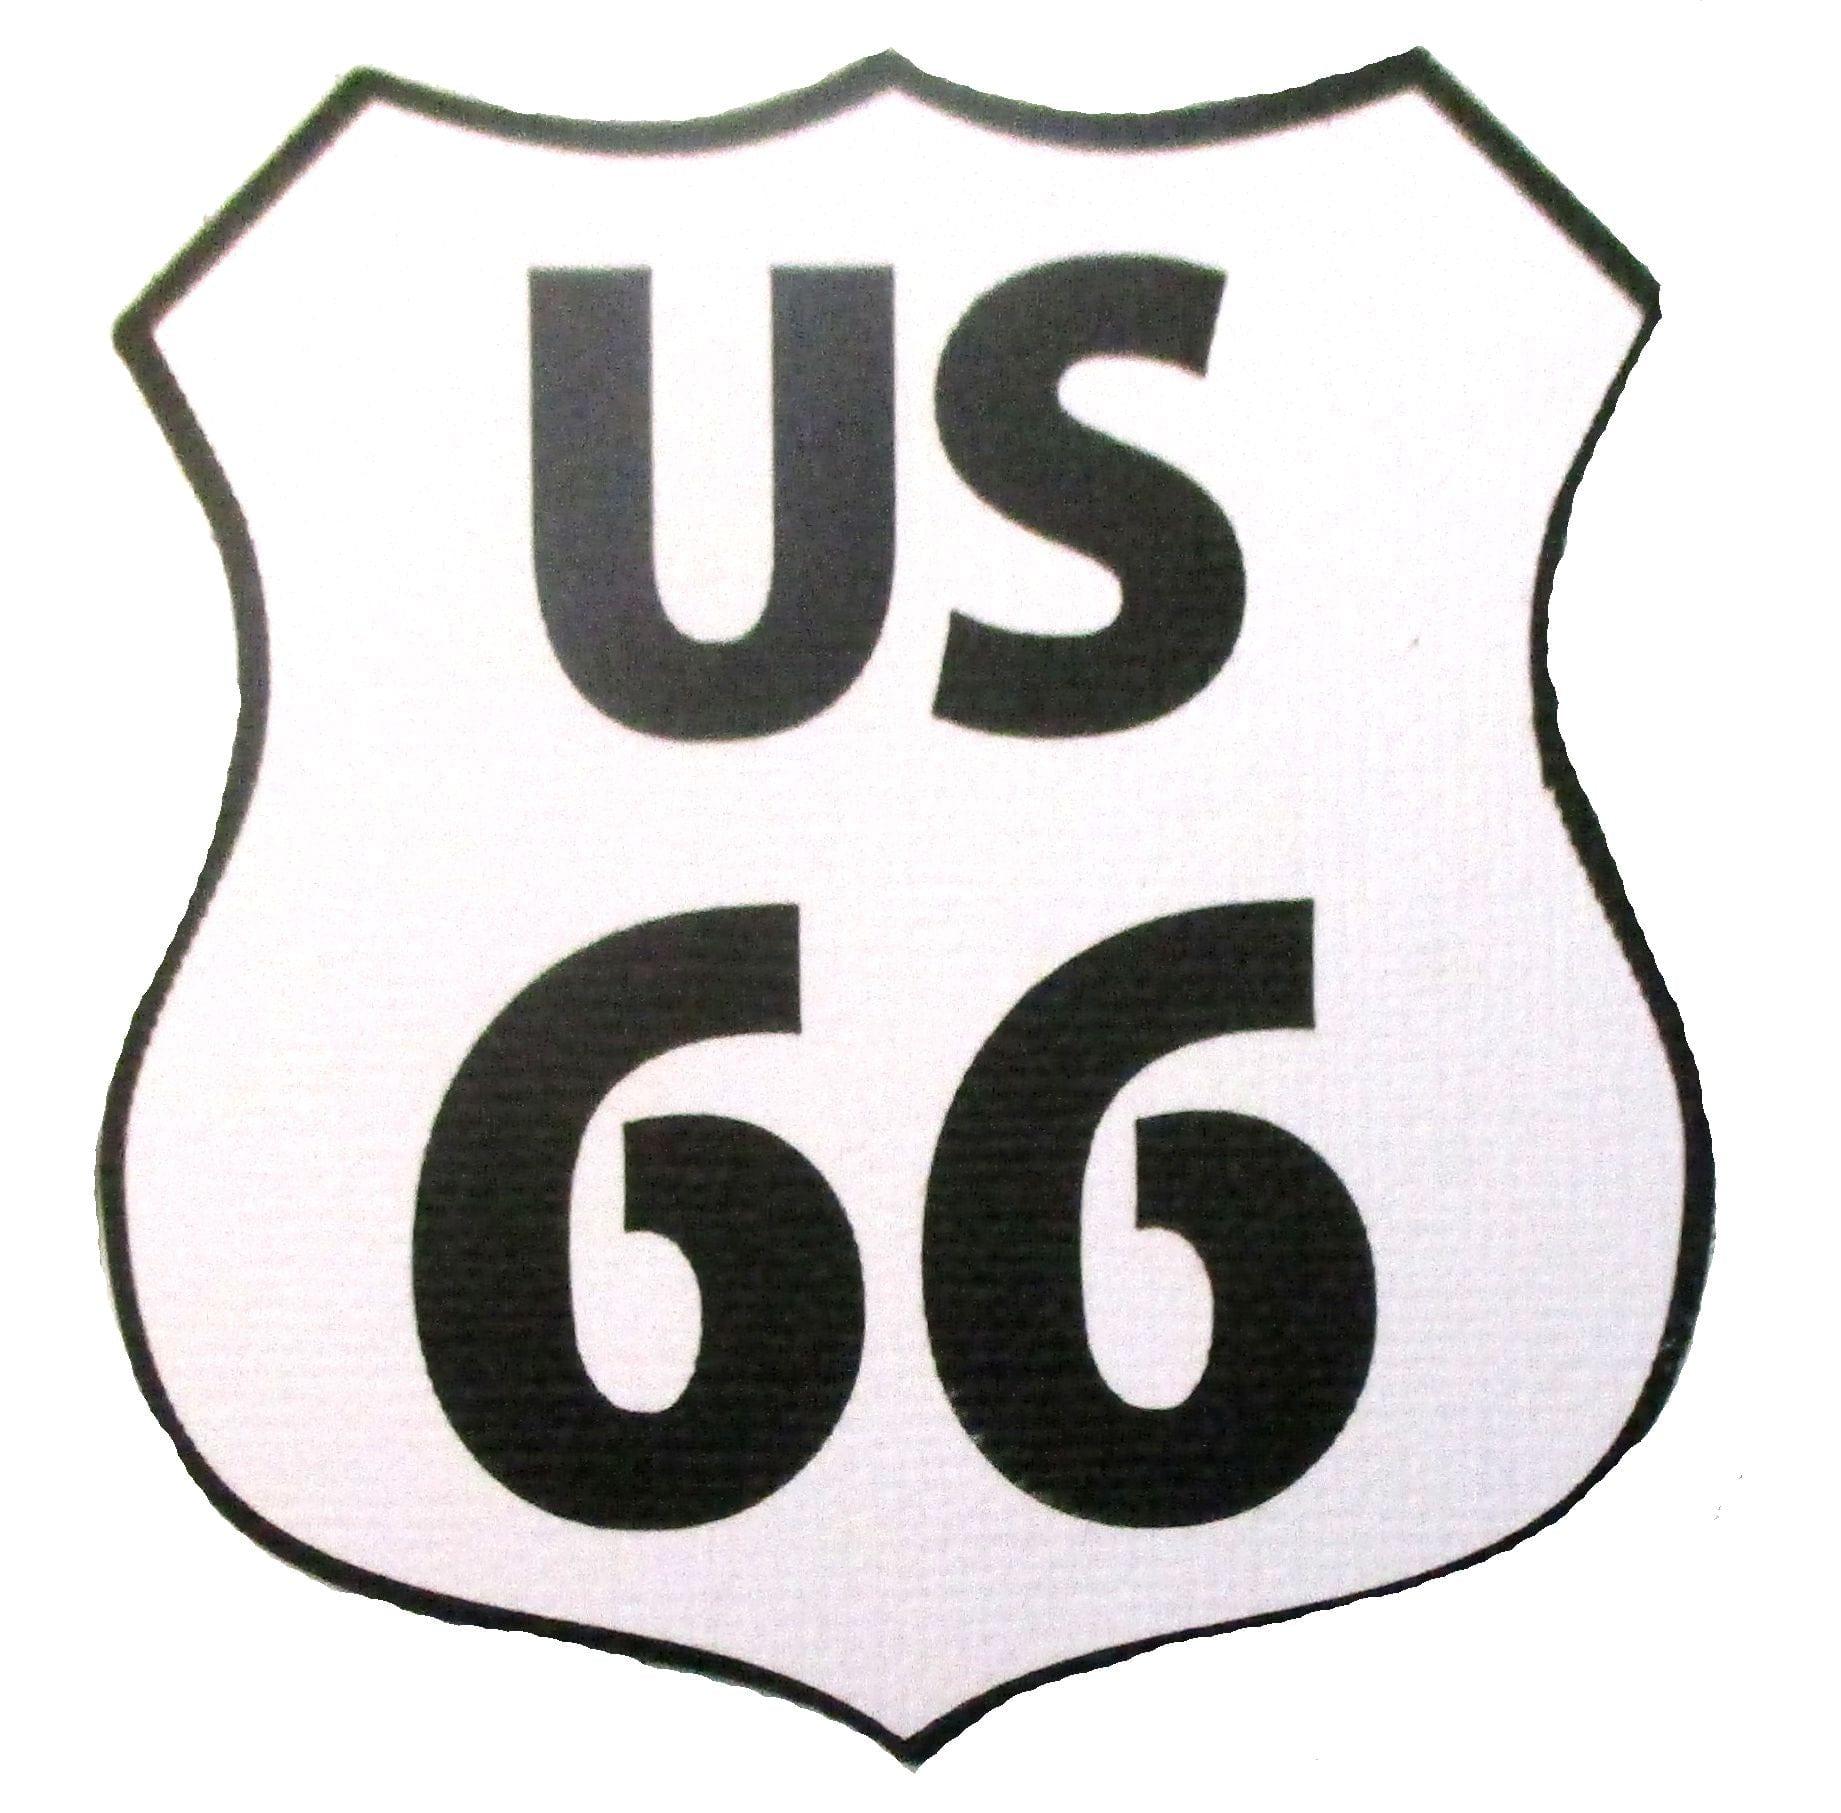 Route 66 Road Sign 3 x 3 Scrapbook Laser Embellishment by SSC Laser Designs